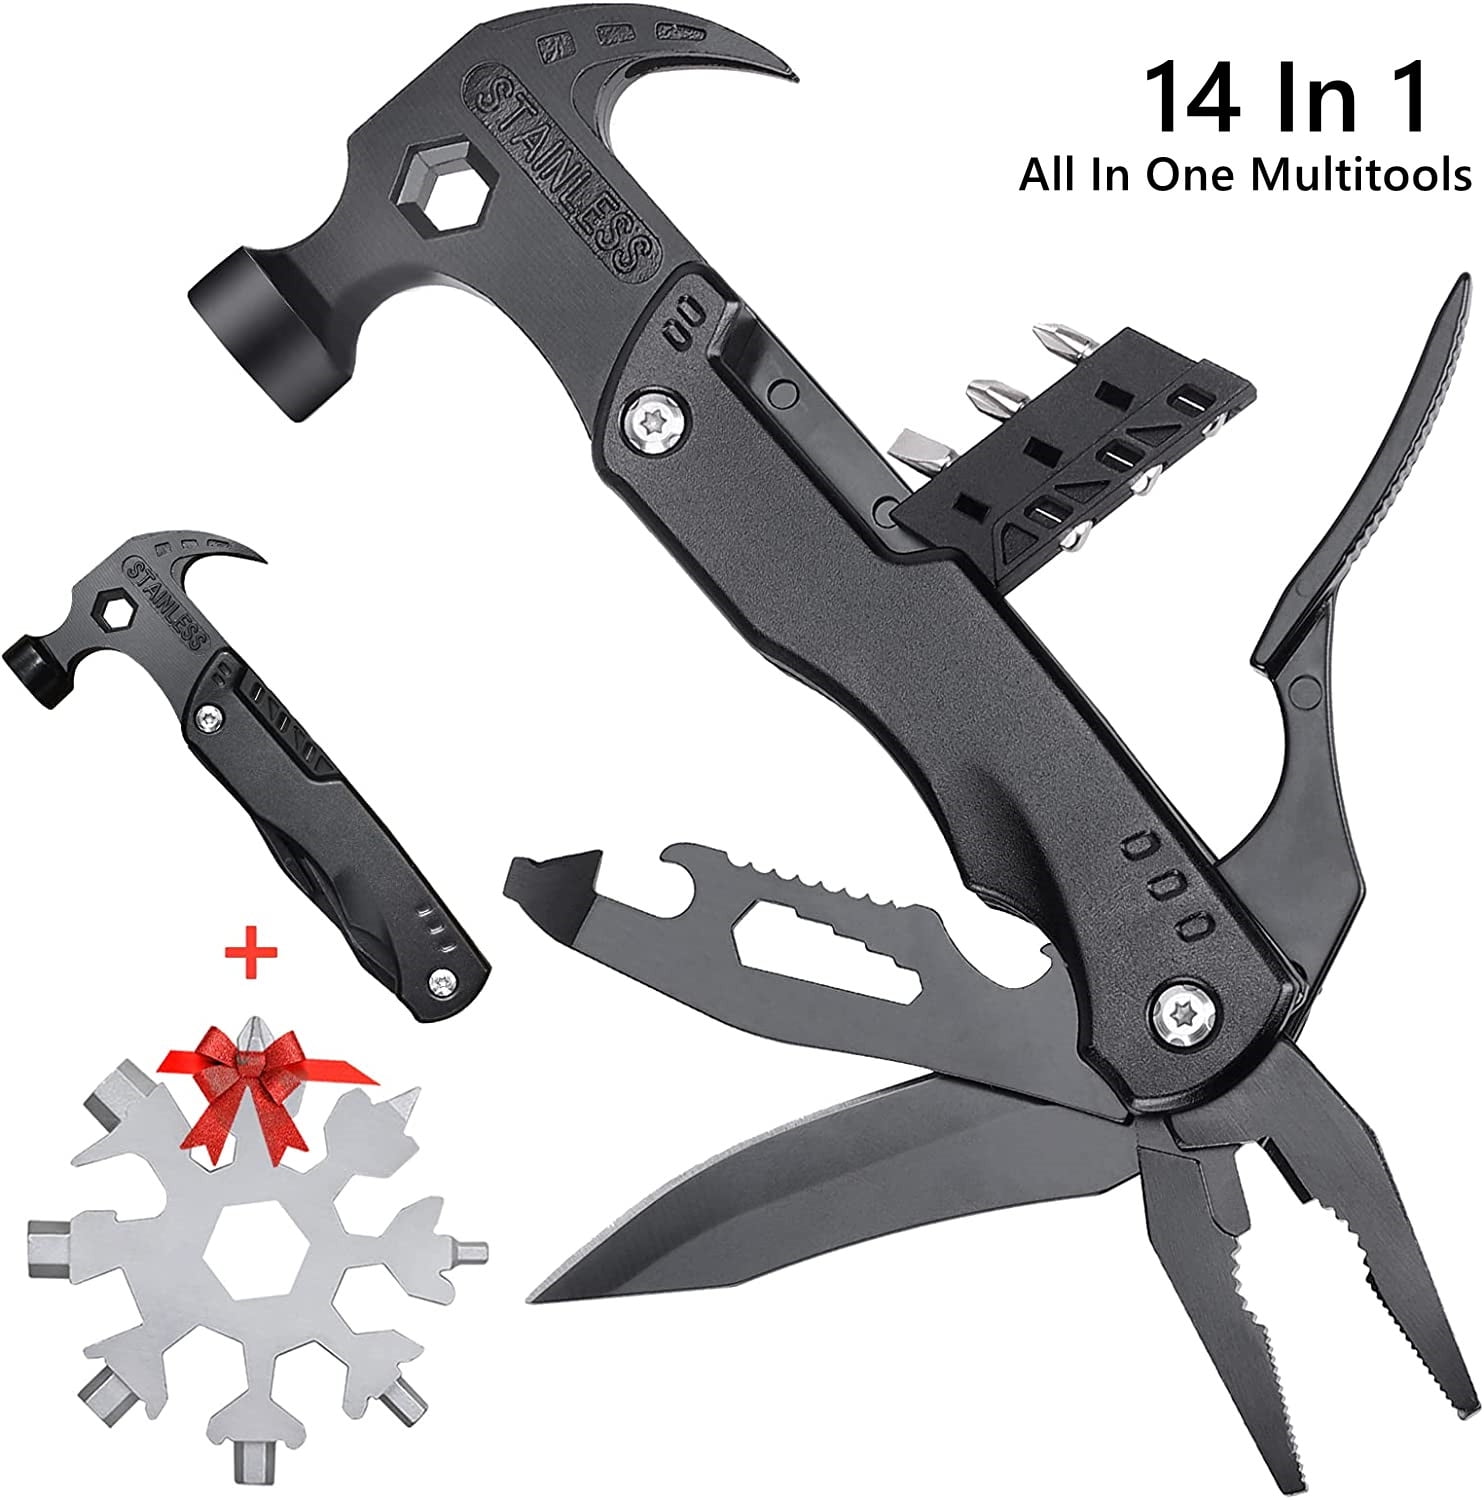 Birthday　Tools　Accessories　Men　One　Snowflake　Christmas　Camping　Mini　with　Day　Cool　Hammer　Camping　Multitool　In　Multi　Hammer　Fathers　Wrench,　for　In　Tool,　14　Gadgets　18-In-1　All